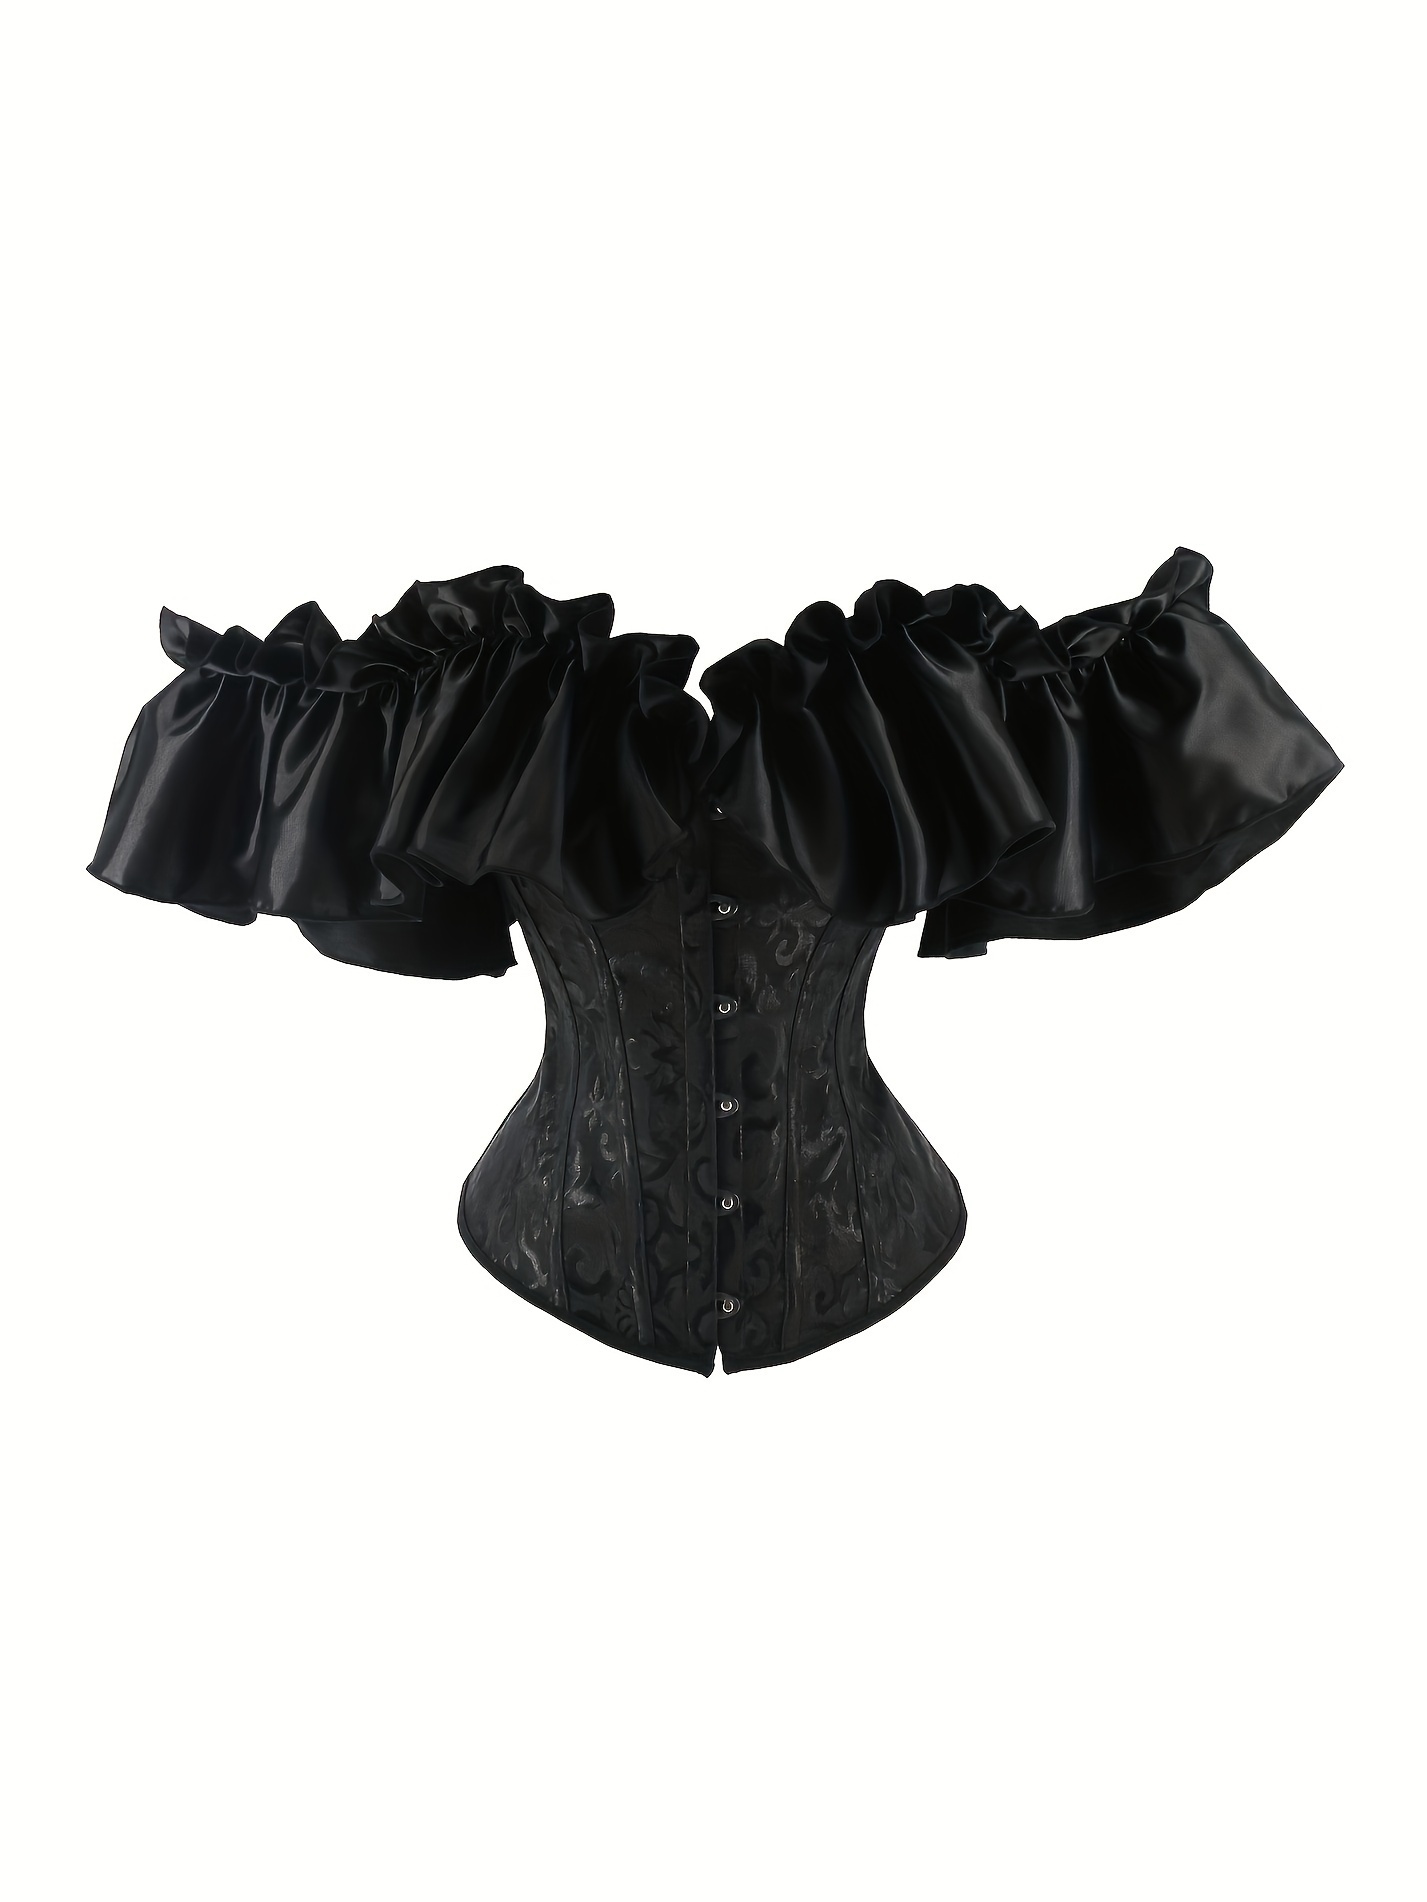 Find Cheap, Fashionable and Slimming pirate corsets 